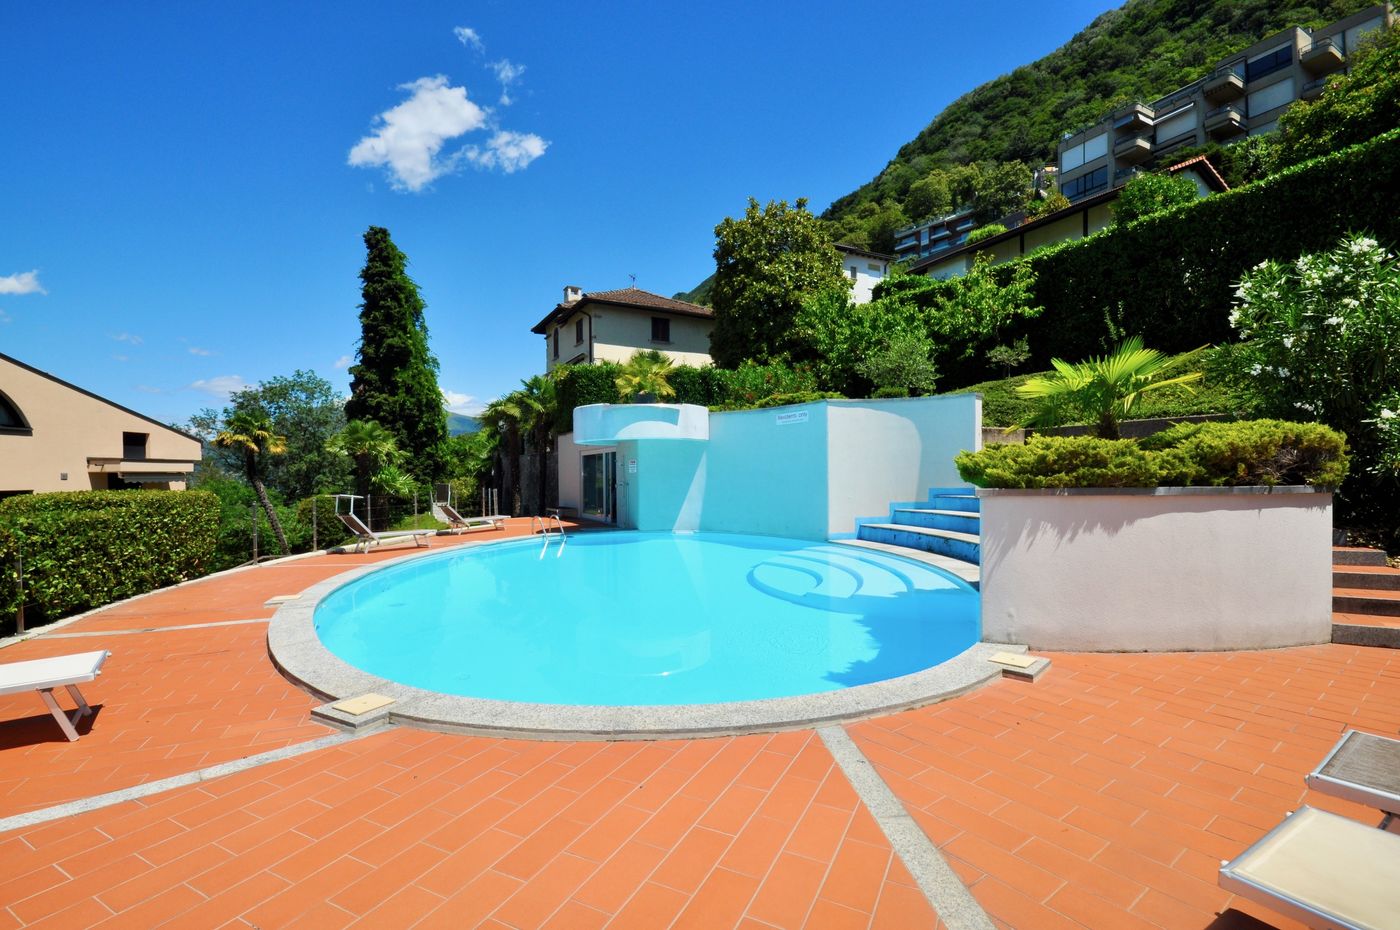 2 Bedroom Apartment with Lugano Lake View and Garden in Aldesago